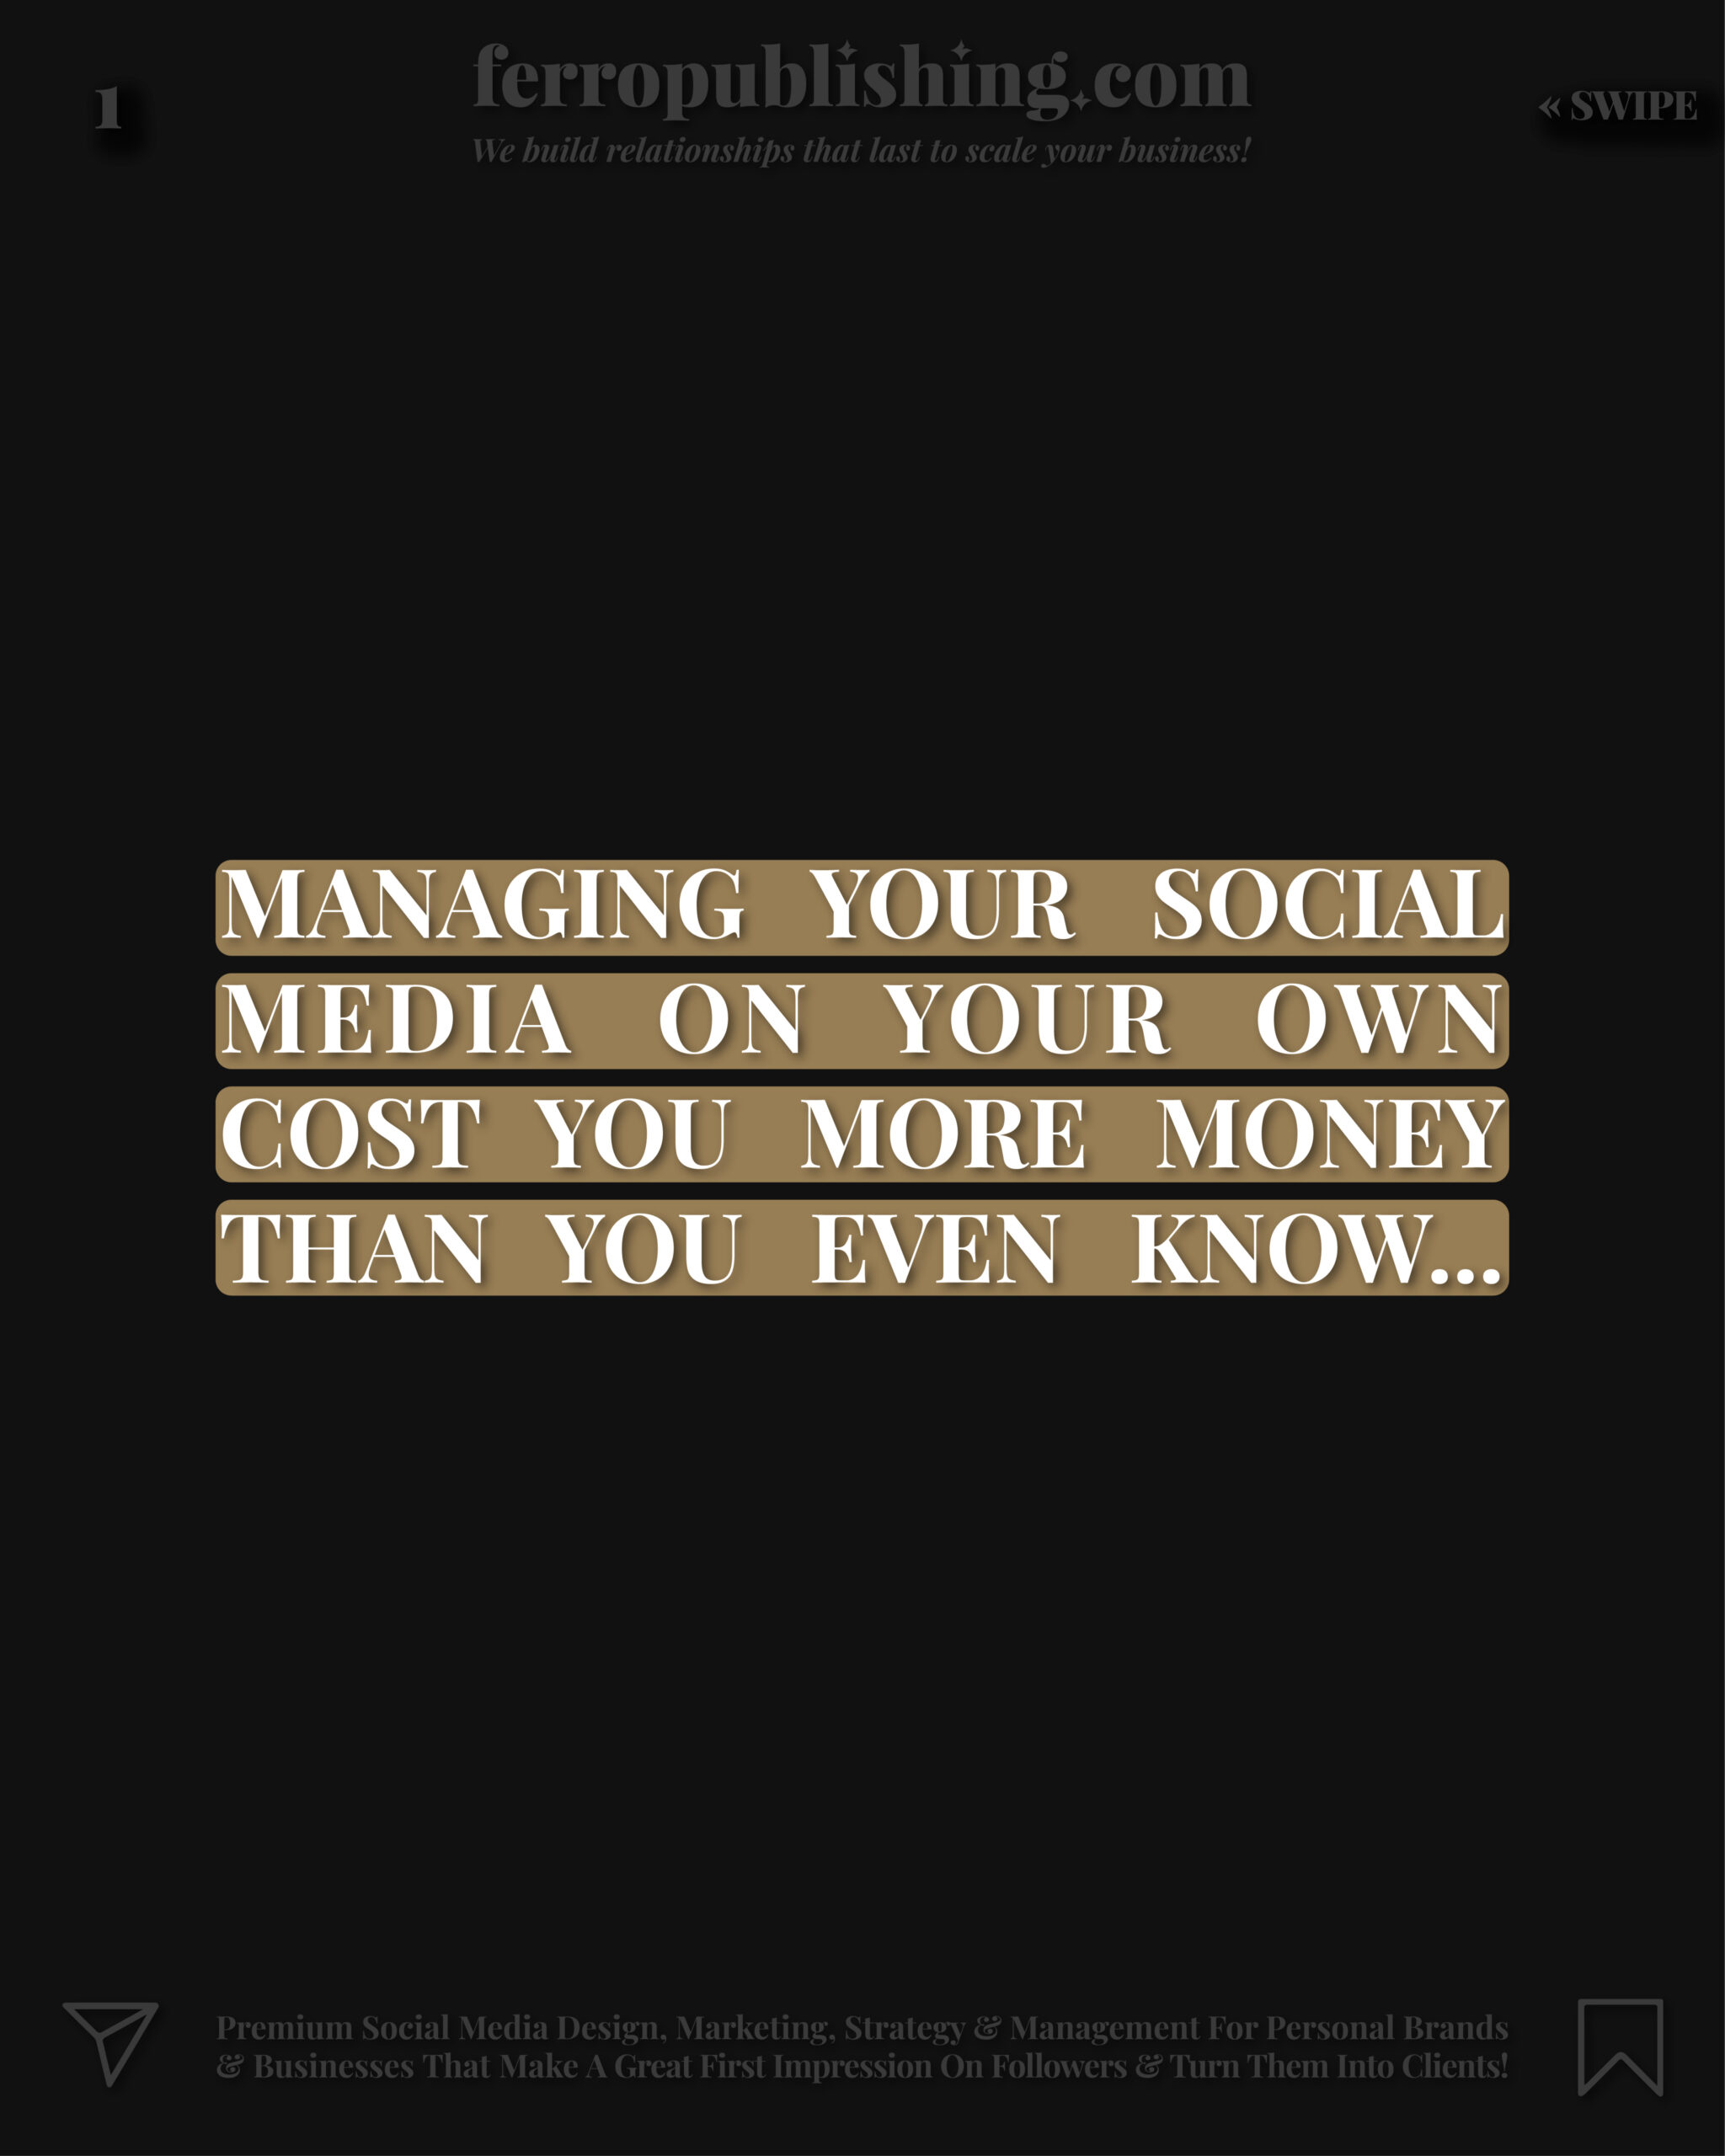 Managing your social media on your own costs you more money than you know…